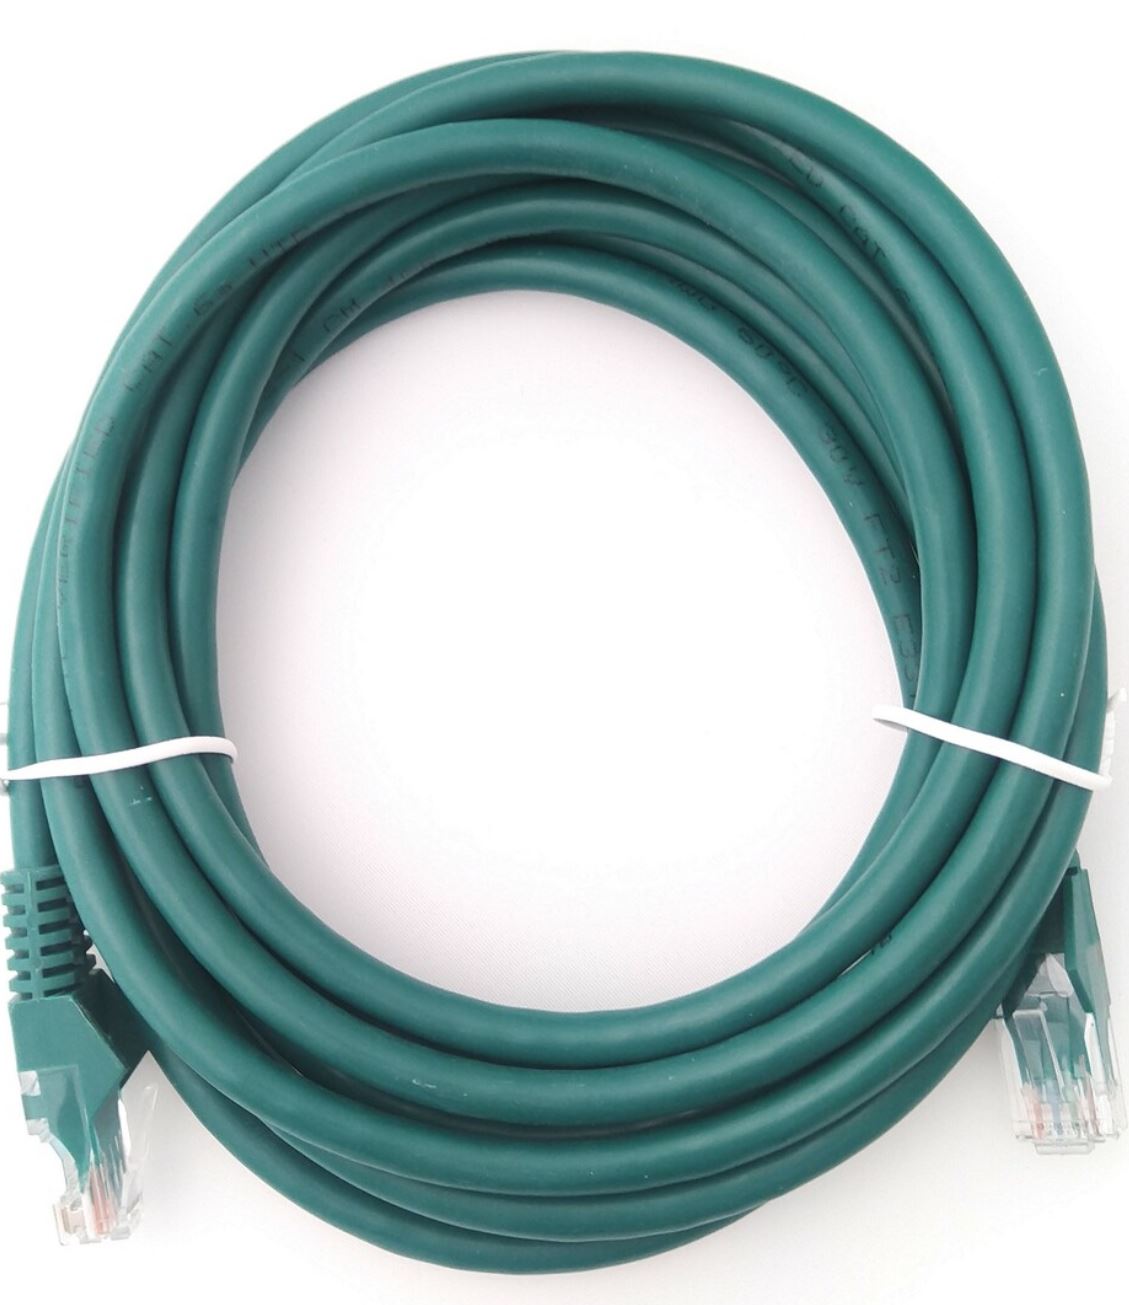 20m UTP Ethernet Cable (Green, Cat 6A)